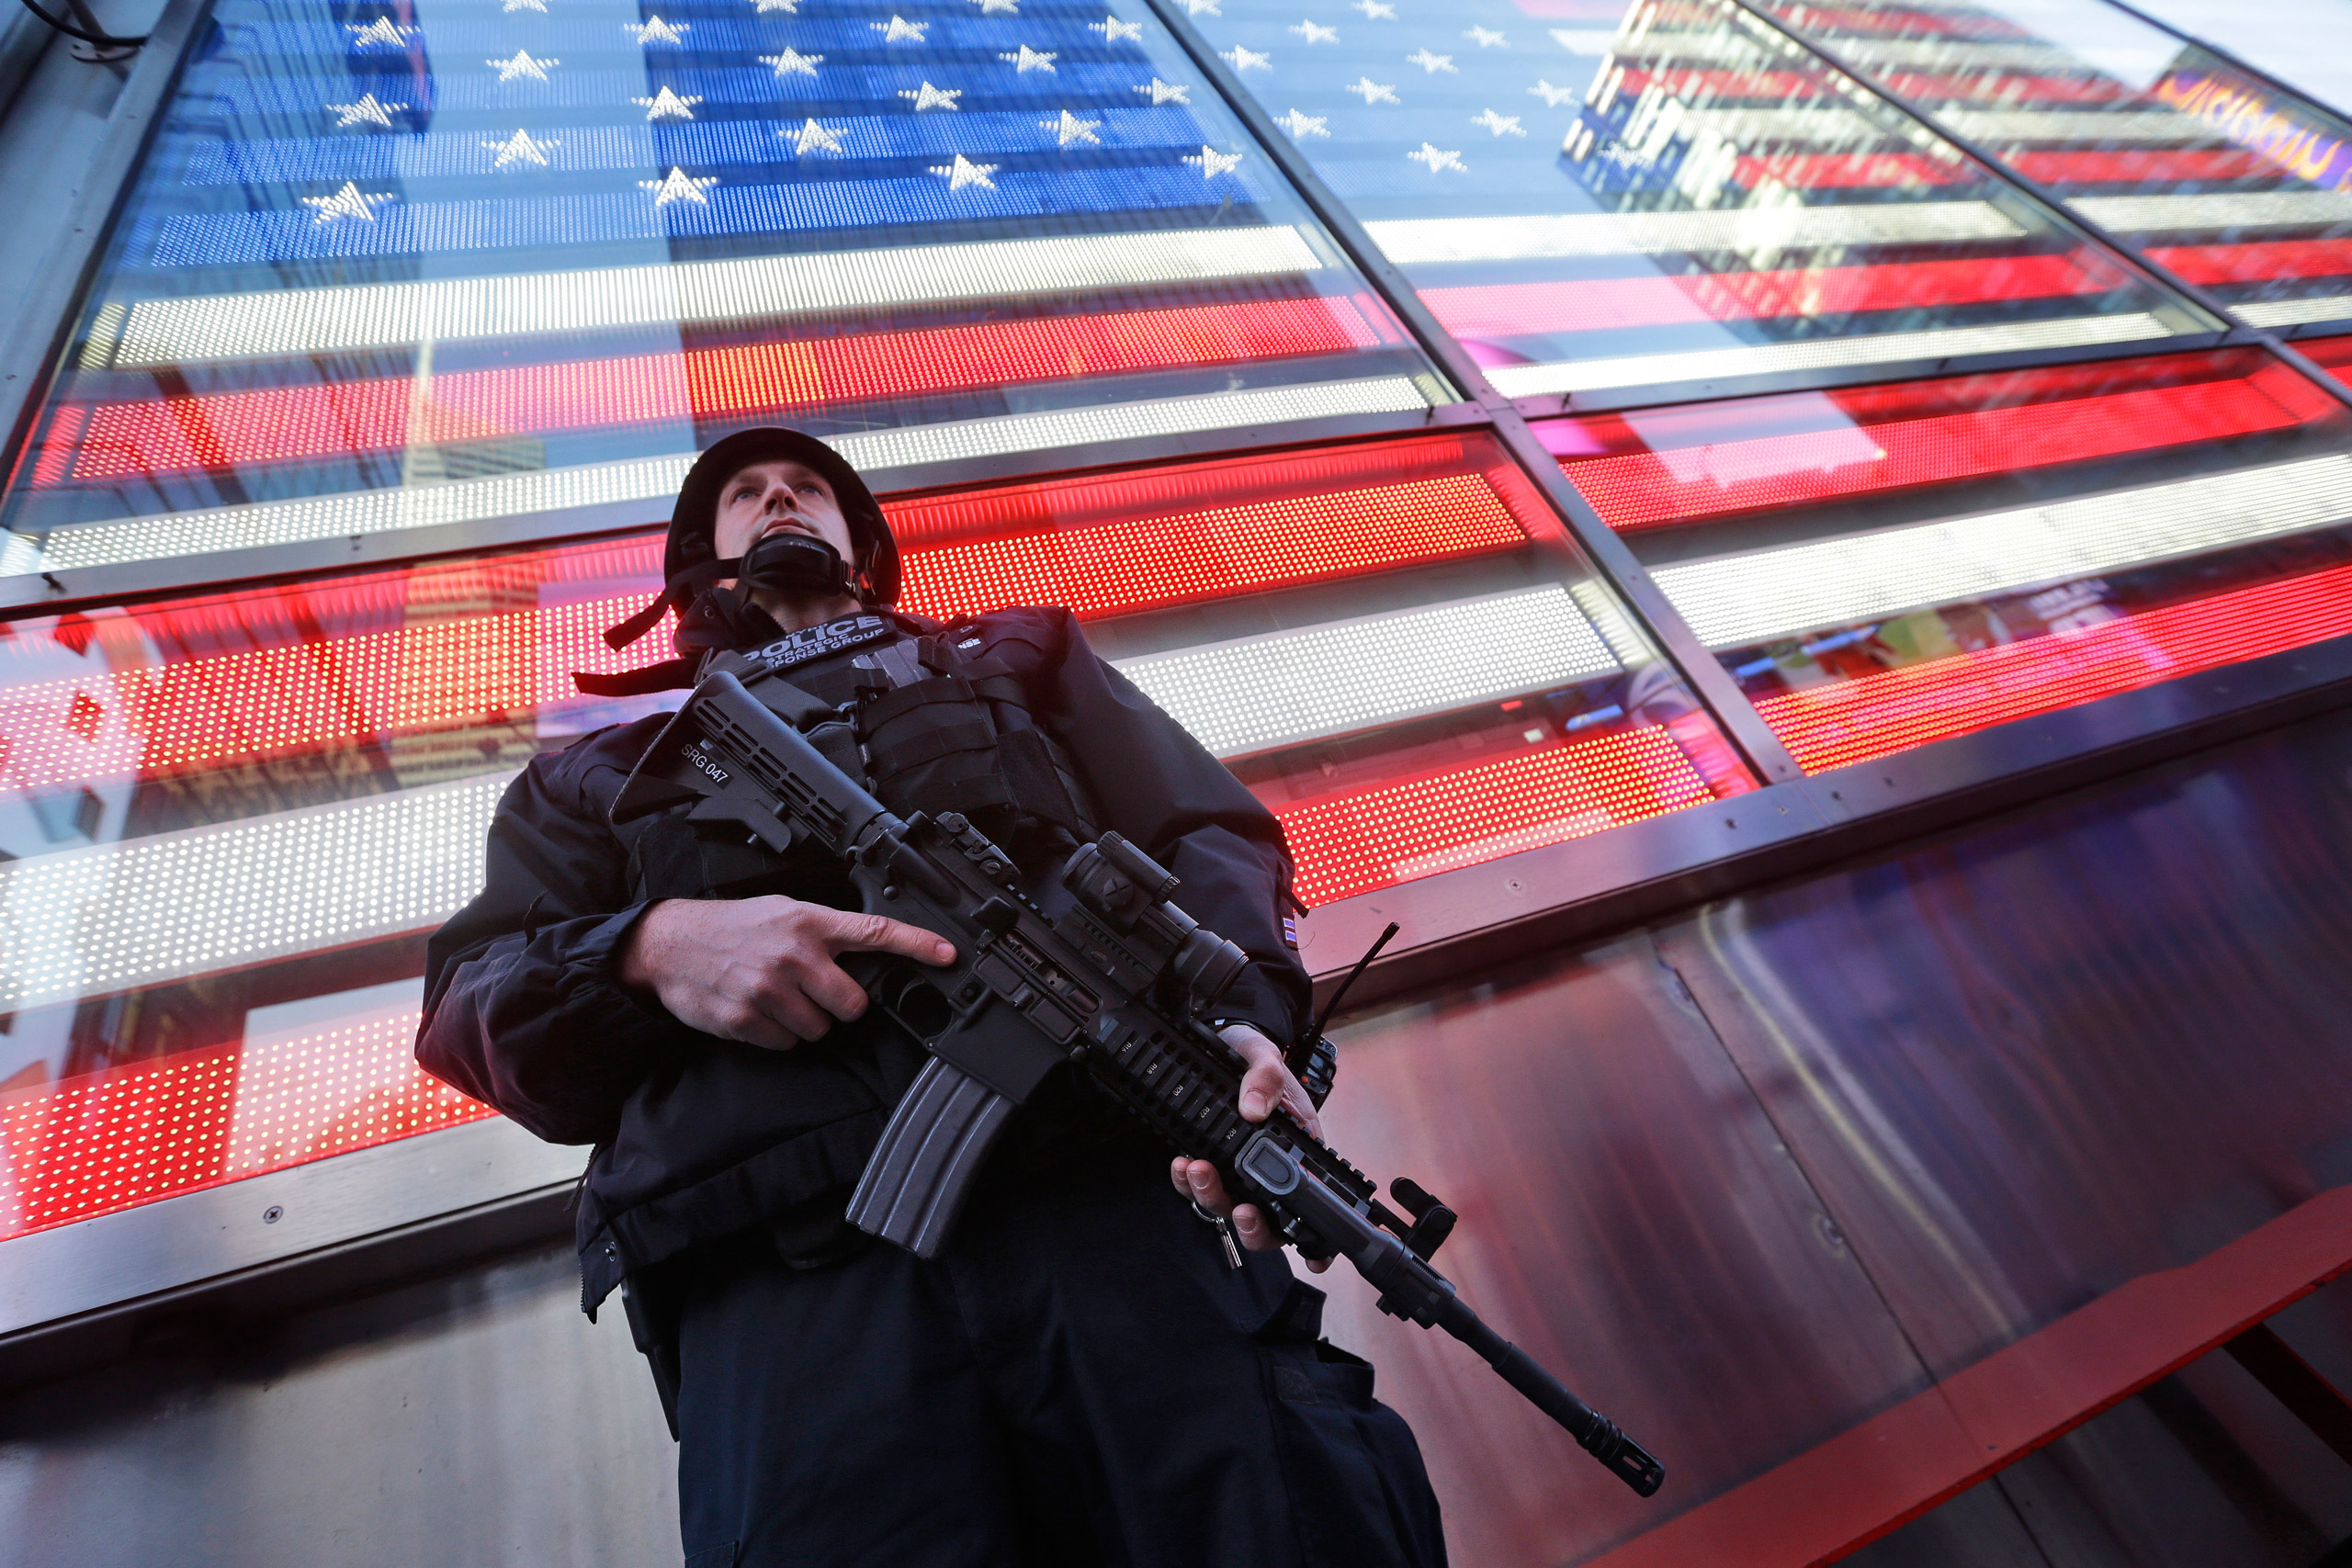 A heavily armed New York city police officer with the Strategic Response Group stands guard at the armed forces recruiting center in New York's Times Square, Saturday, Nov. 14, 2015.  Police in New York say they've deployed extra units to crowded areas of the city "out of an abundance of caution" in the wake of the attacks in Paris, France. A New York Police Department statement released Friday stressed police have "no indication that the attack has any nexus to New York City." (AP Photo/Mary Altaffer)